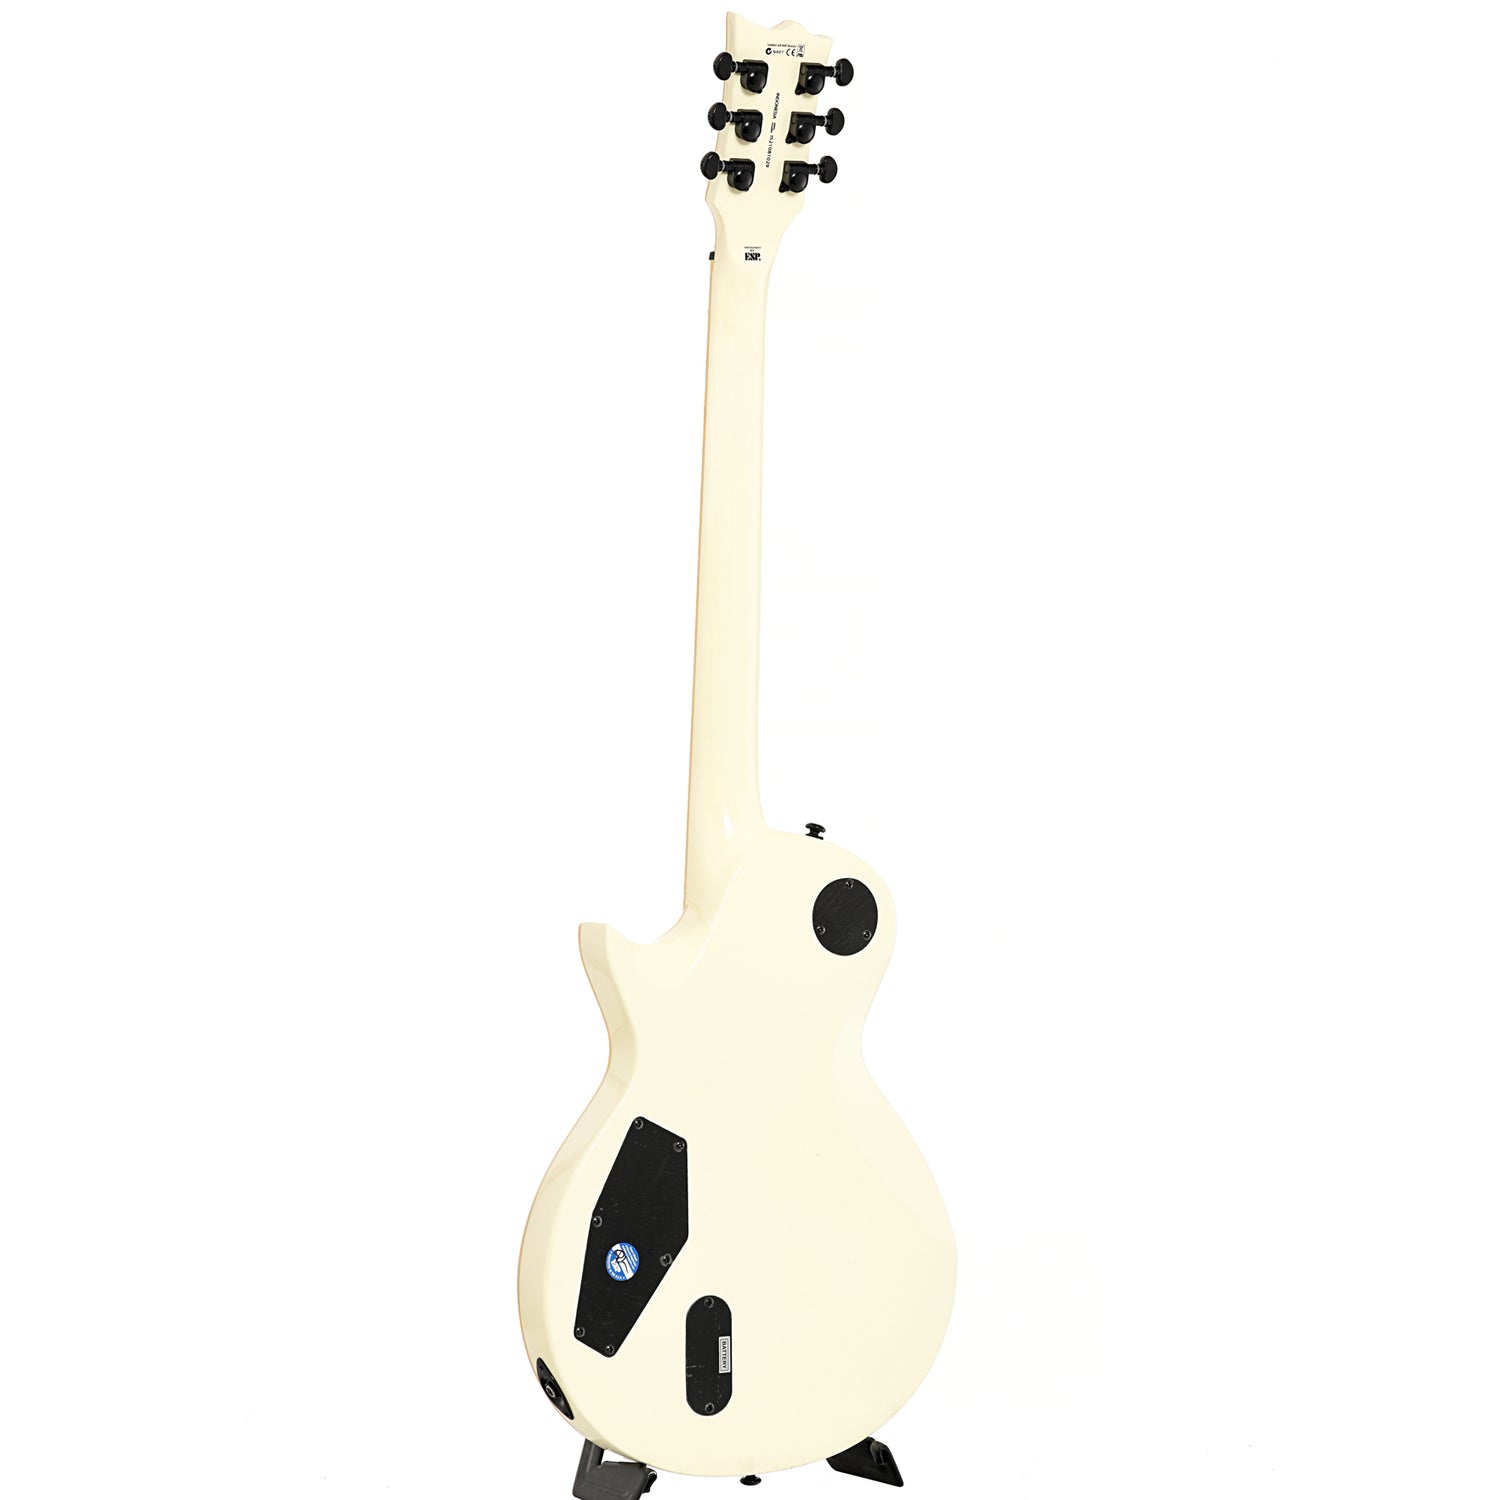 Image 11 of ESP LTD EC-401 Electric Guitar, Olympic White- SKU# EC401-OW : Product Type Solid Body Electric Guitars : Elderly Instruments